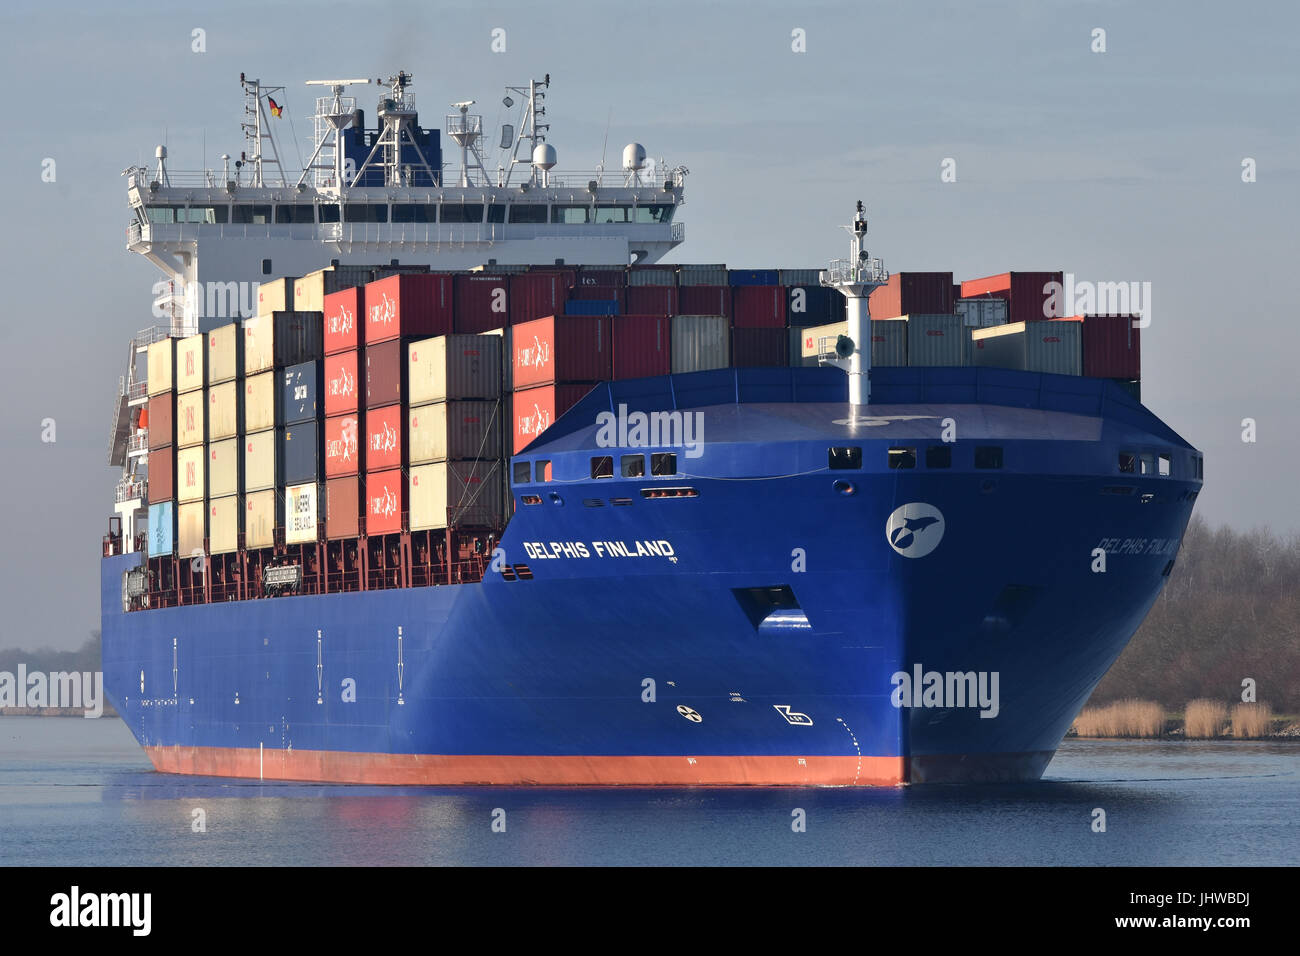 Kiel-Canal-Max containerfeeder Delphis Finland, maiden voyage in the Kiel Canal Stock Photo